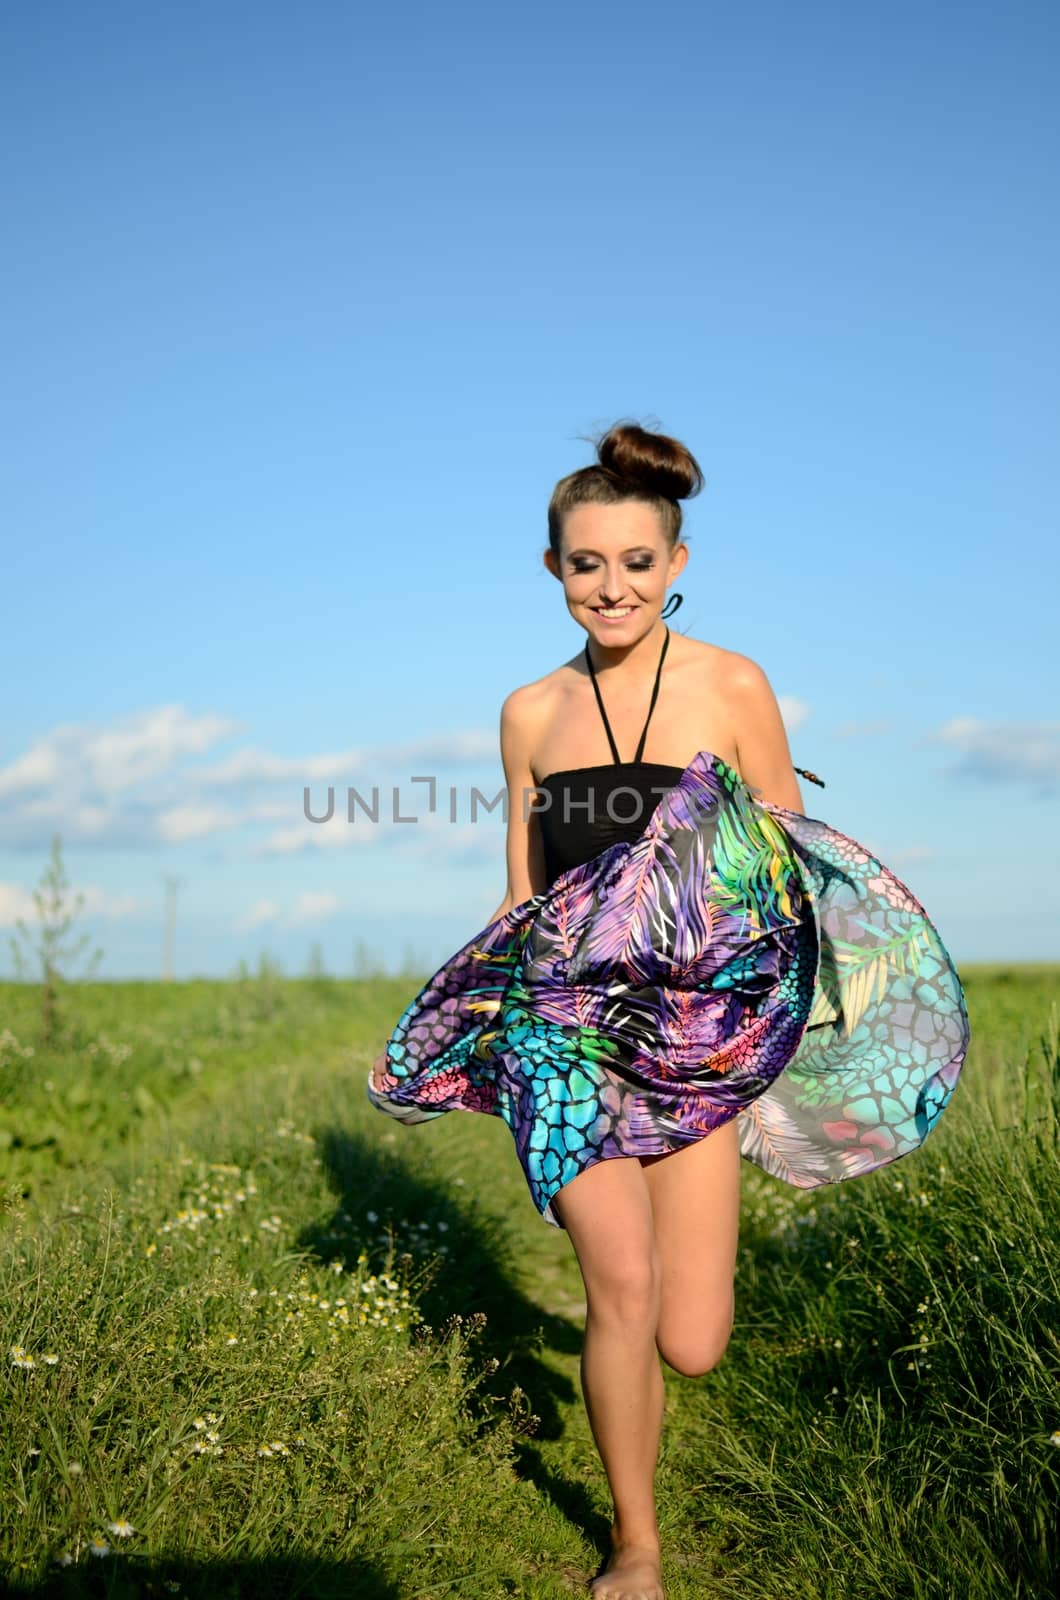 Happy girl runs with colorful dress. Active teenage model from Poland surrounded by green fields and blue sky.